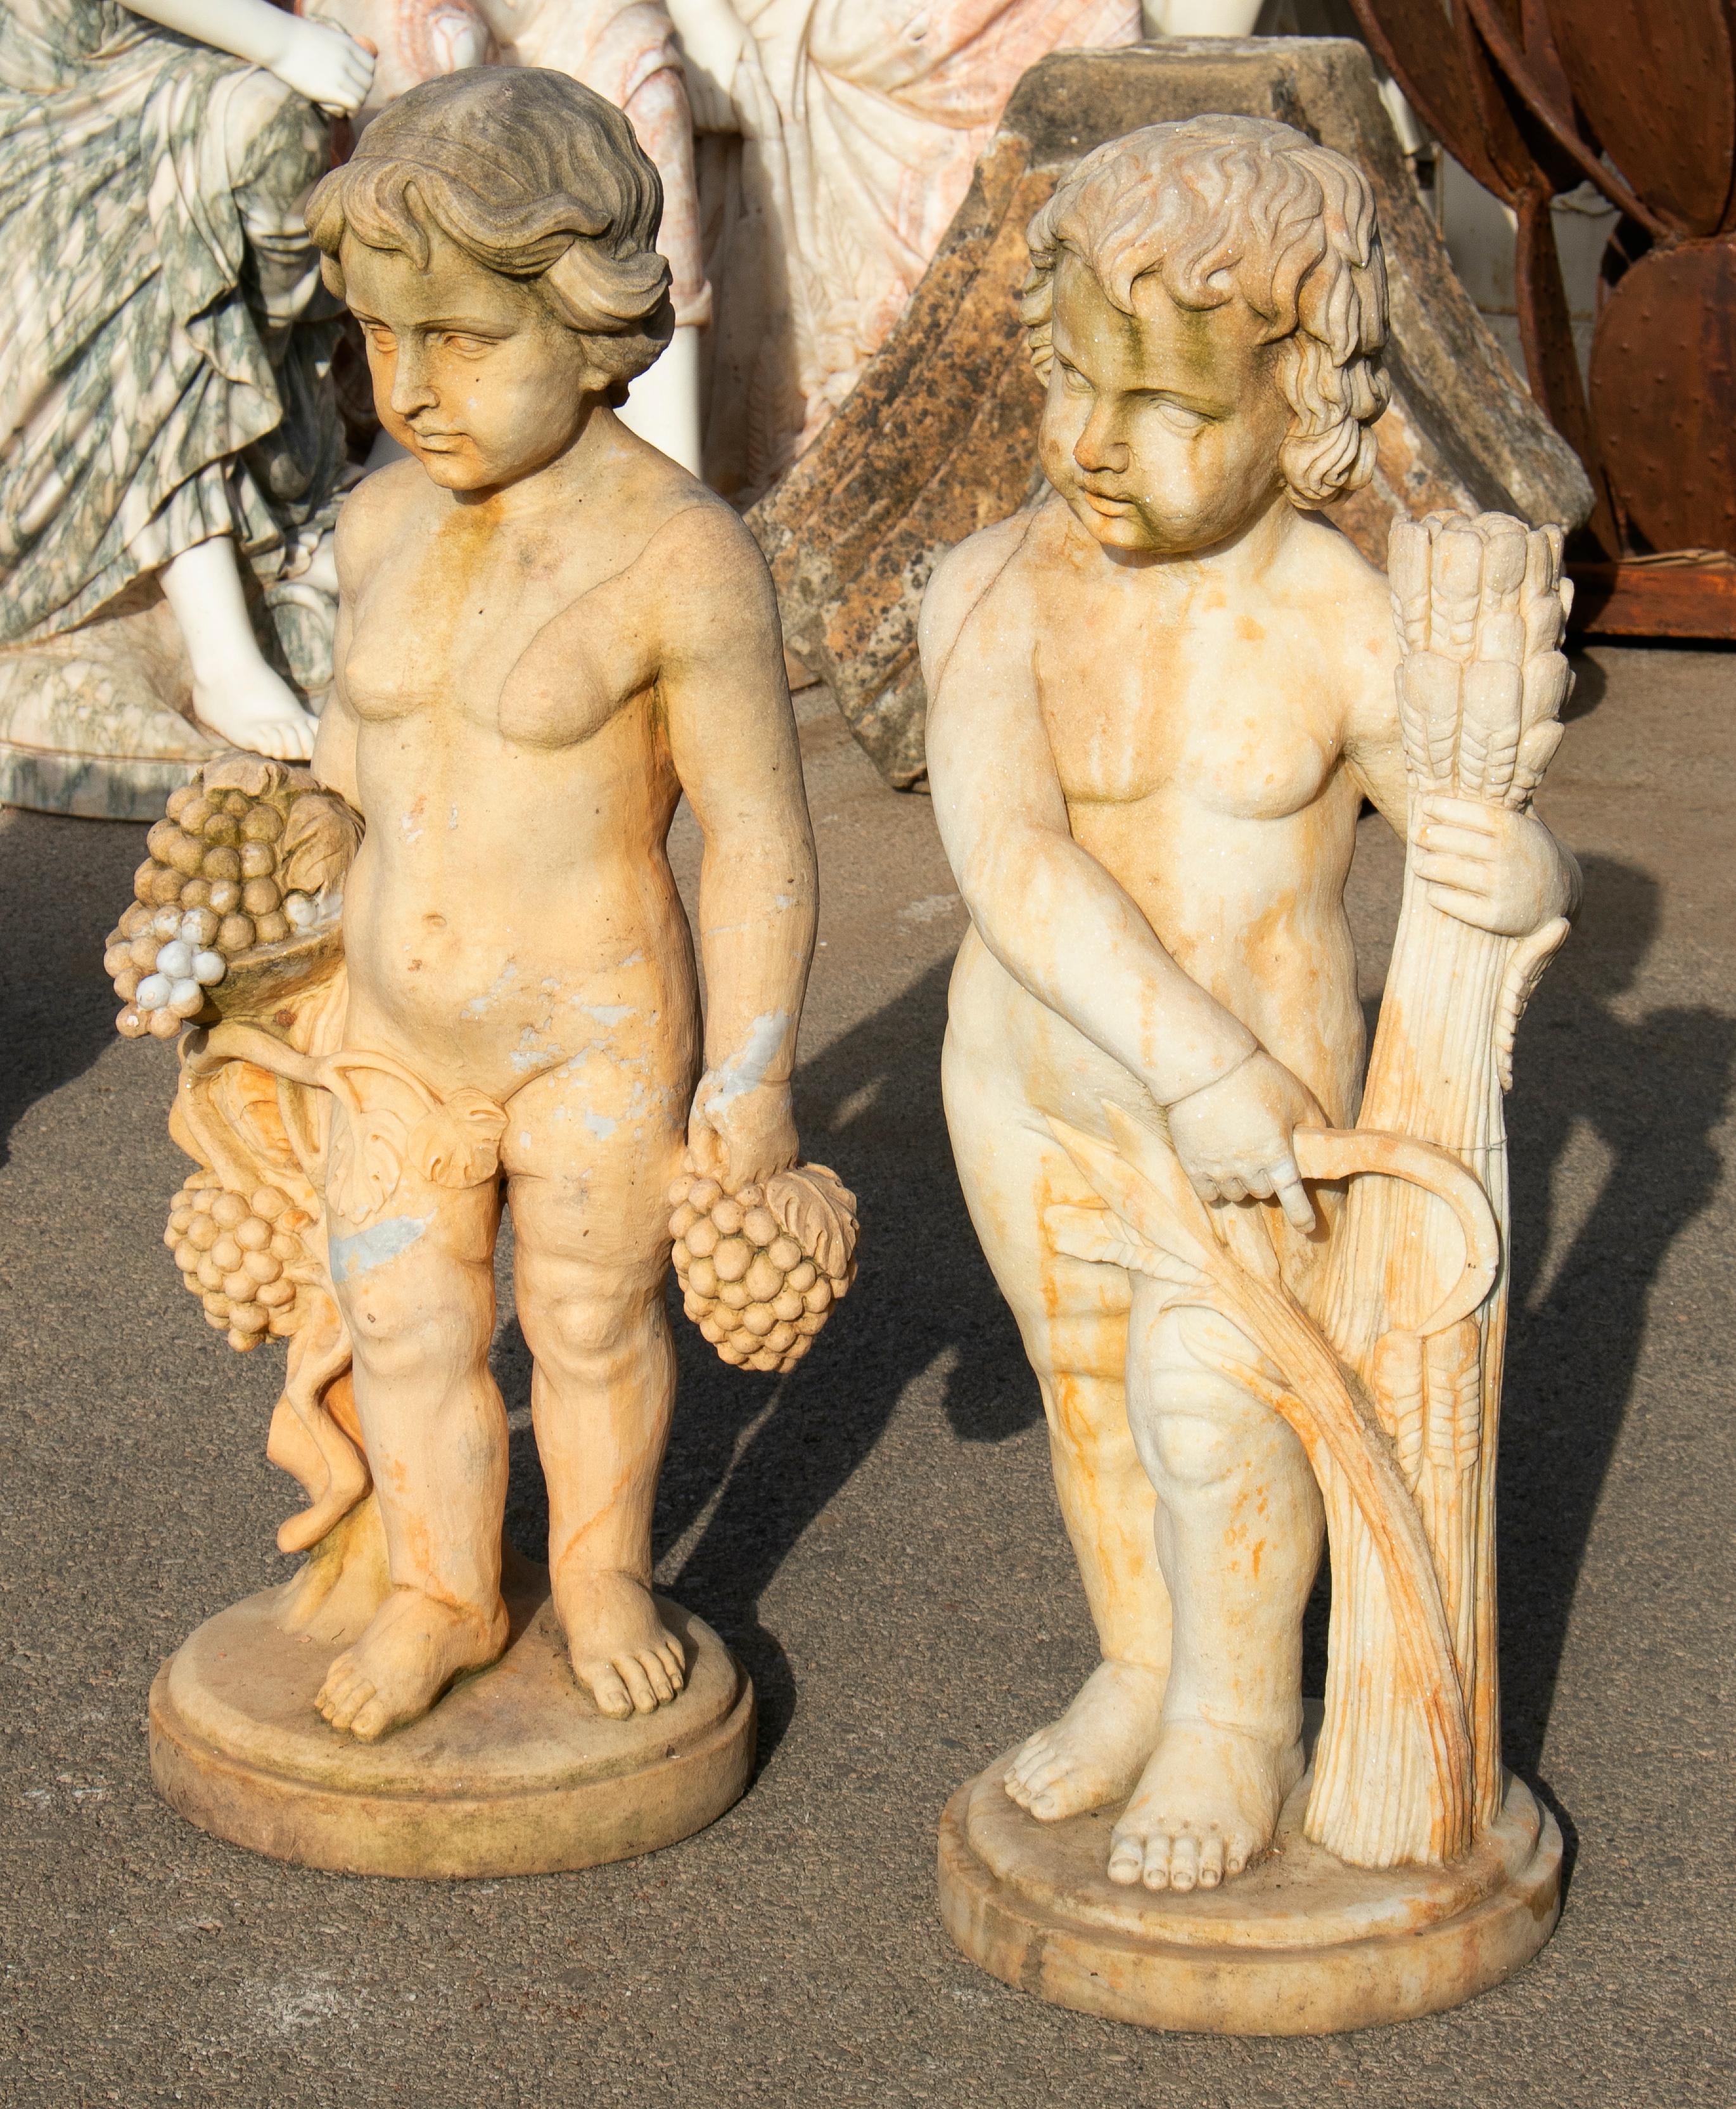 Pair of hand carved boys marble sculptures, one holding fruits and the other wheat, that have been aged to look antique.